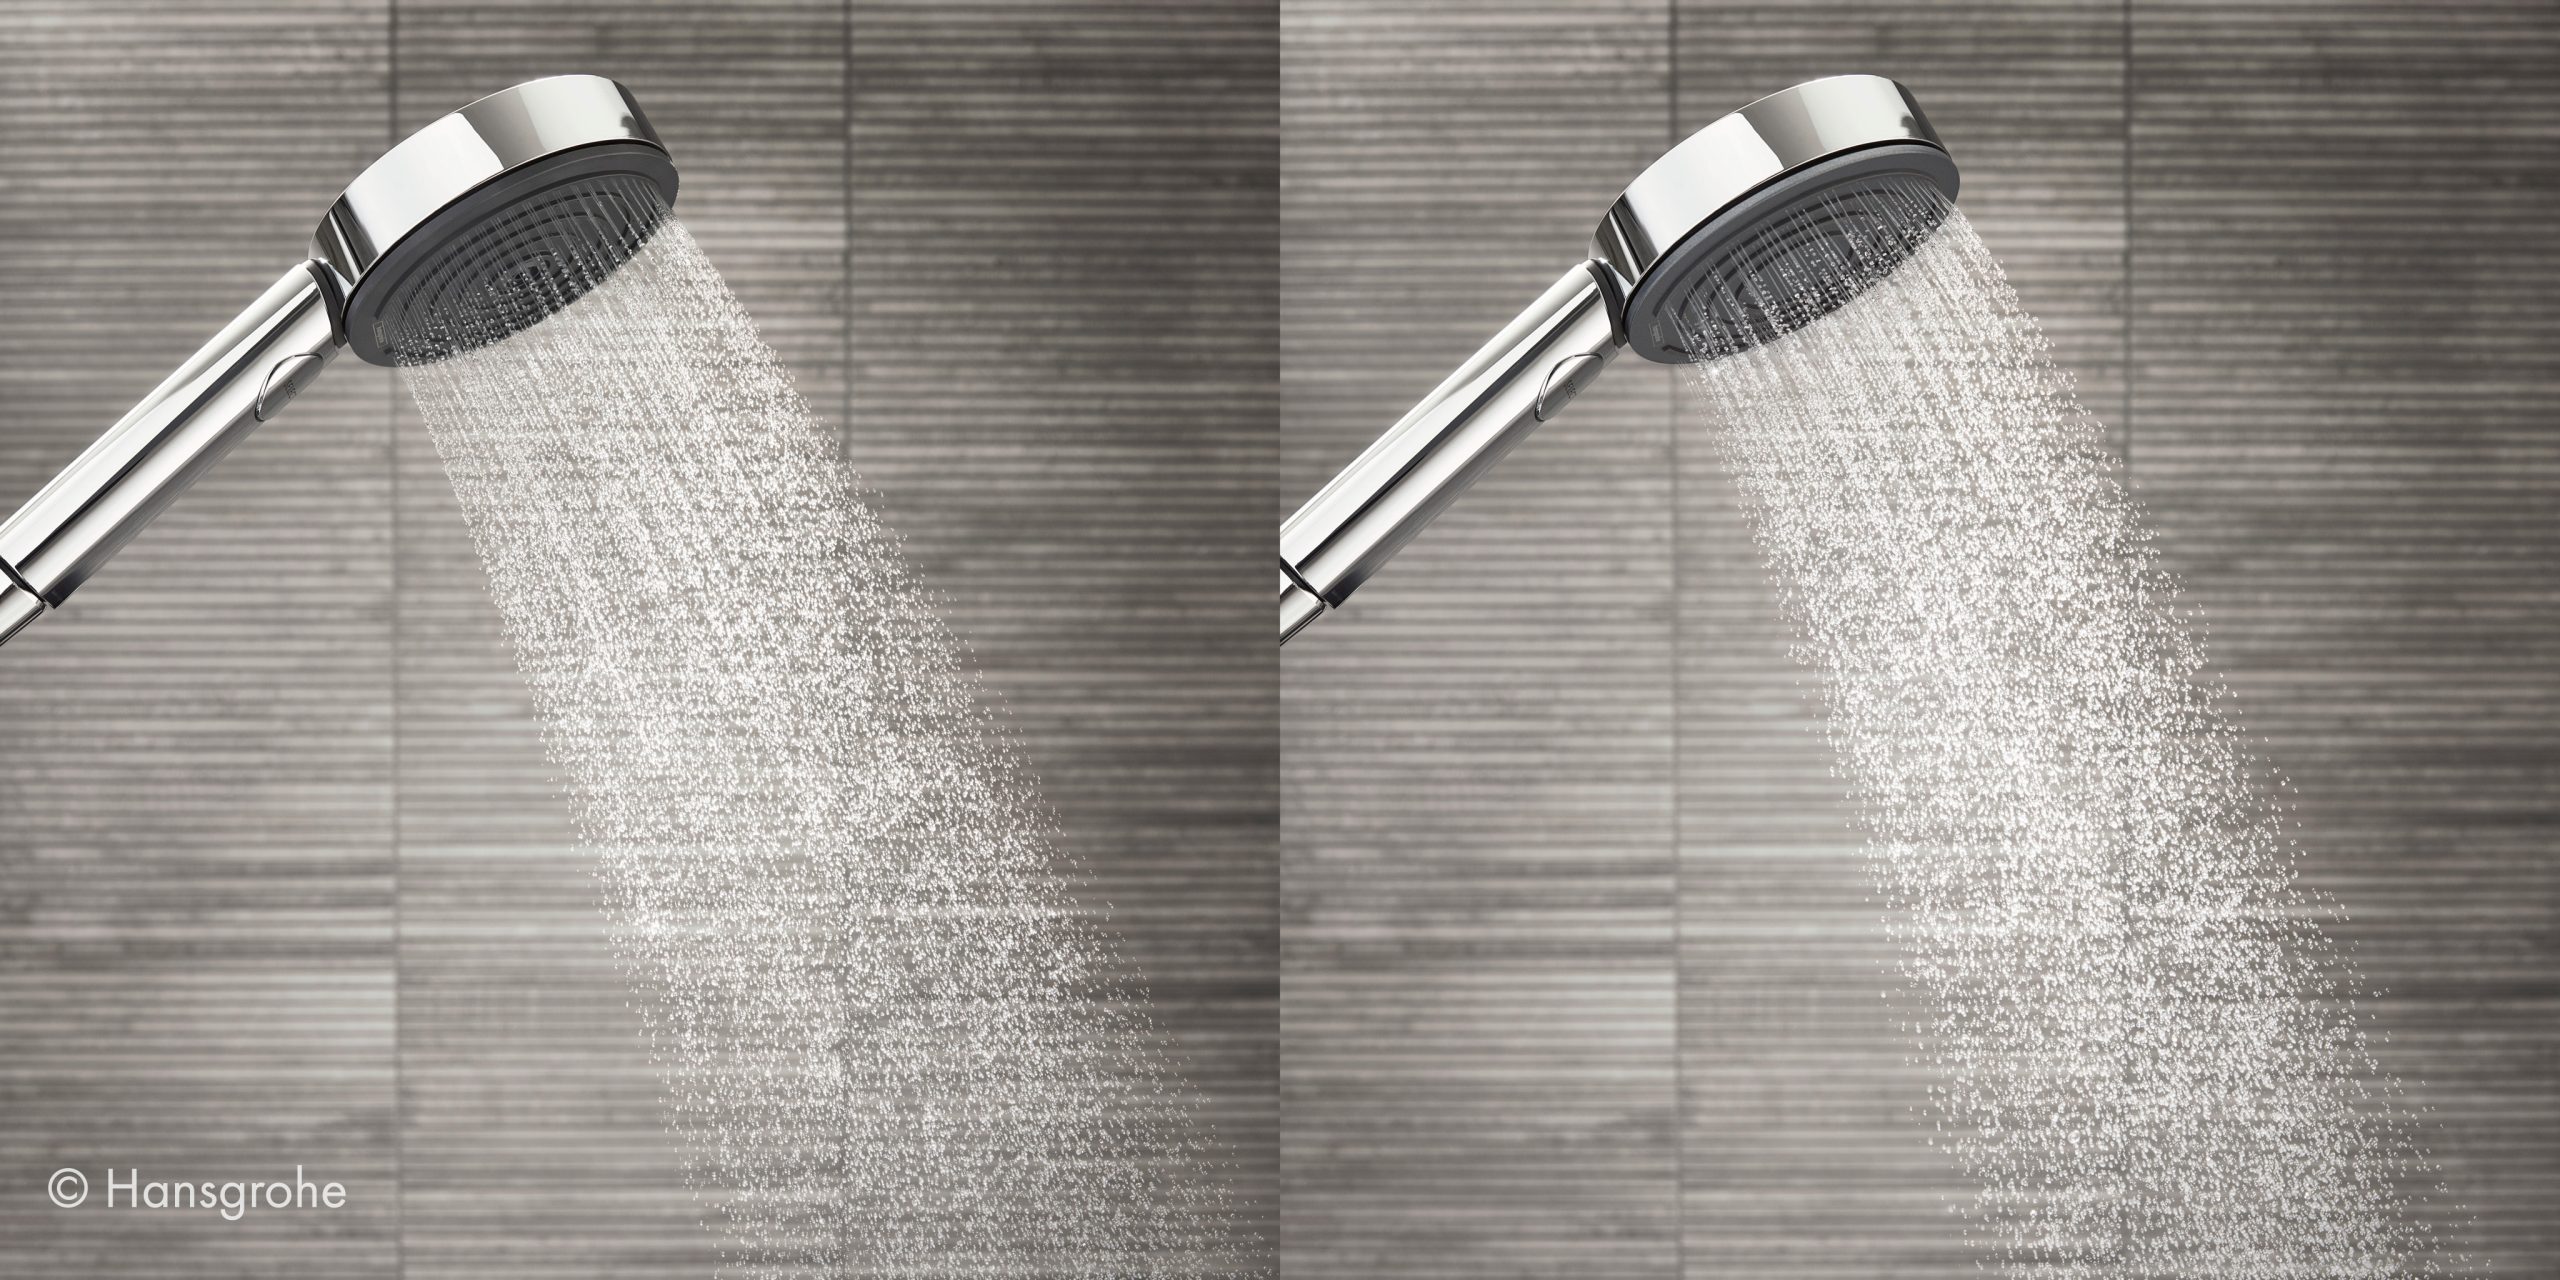 Celebrate World Water Day with Hansgrohe’s Water-Saving Technologies